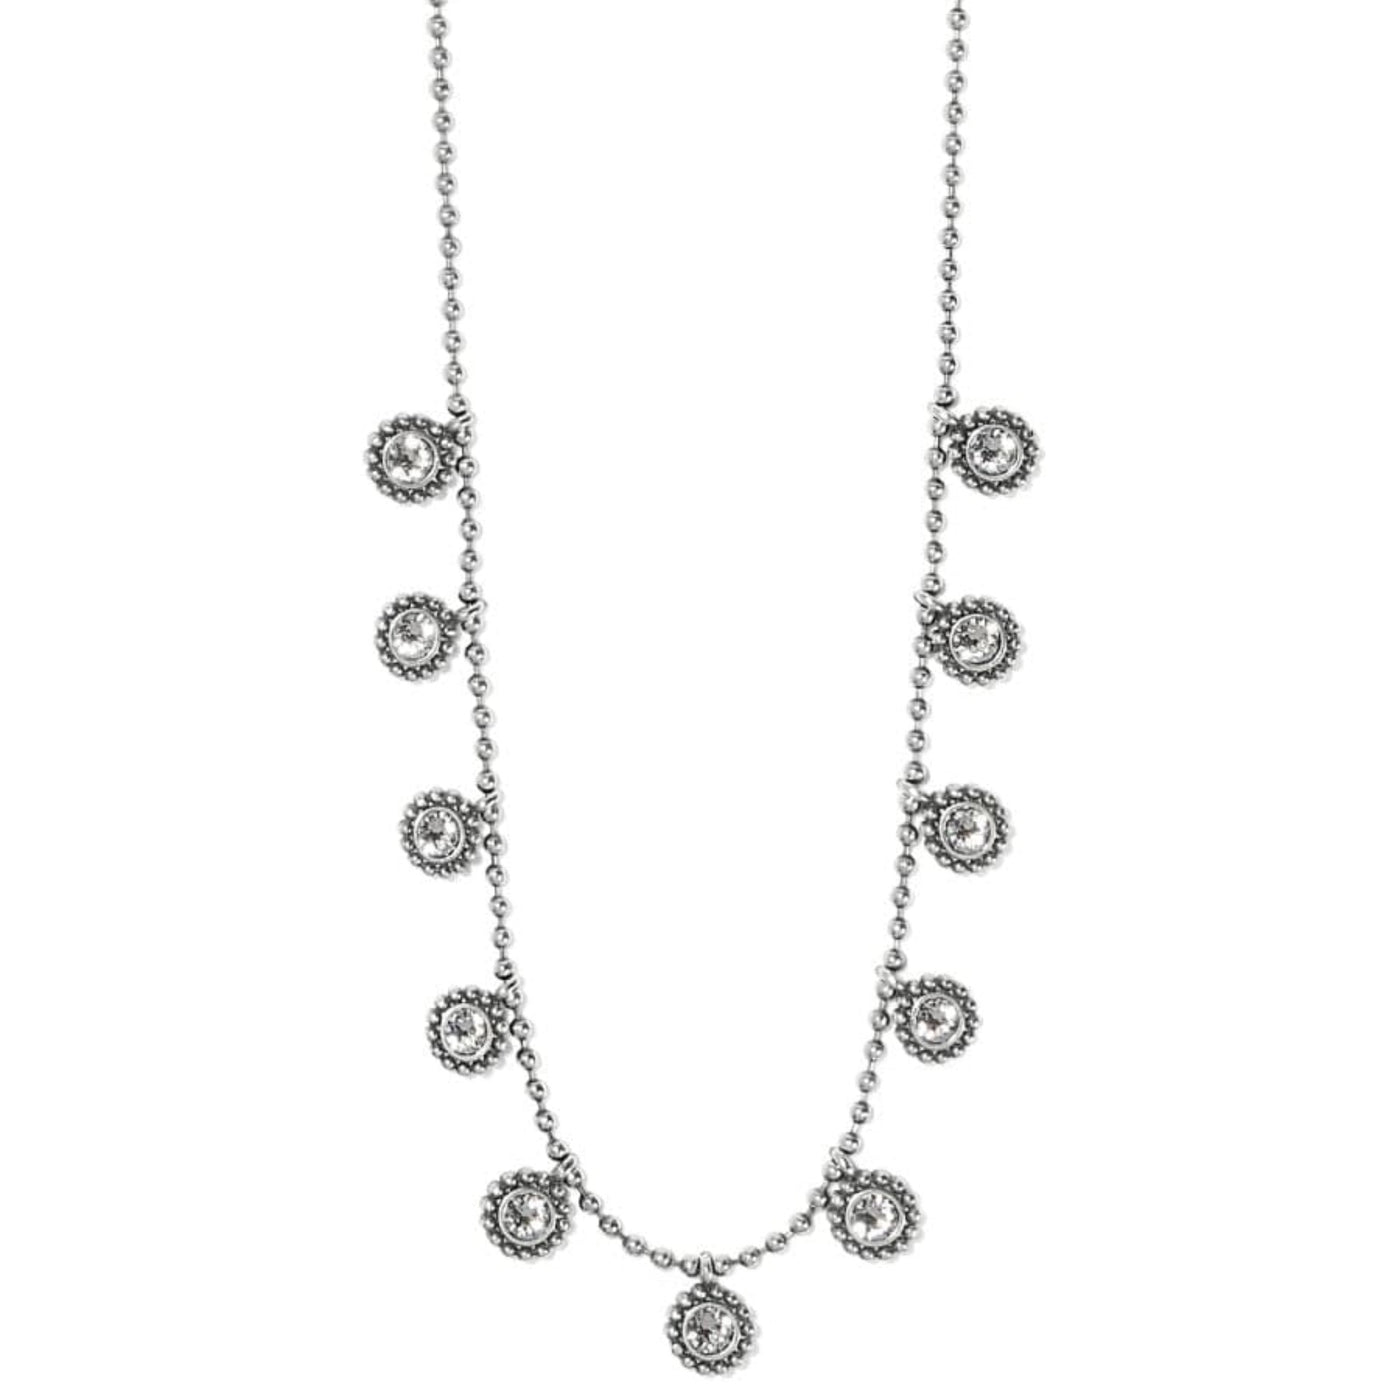 Brighton - Twinkle Drops Necklace